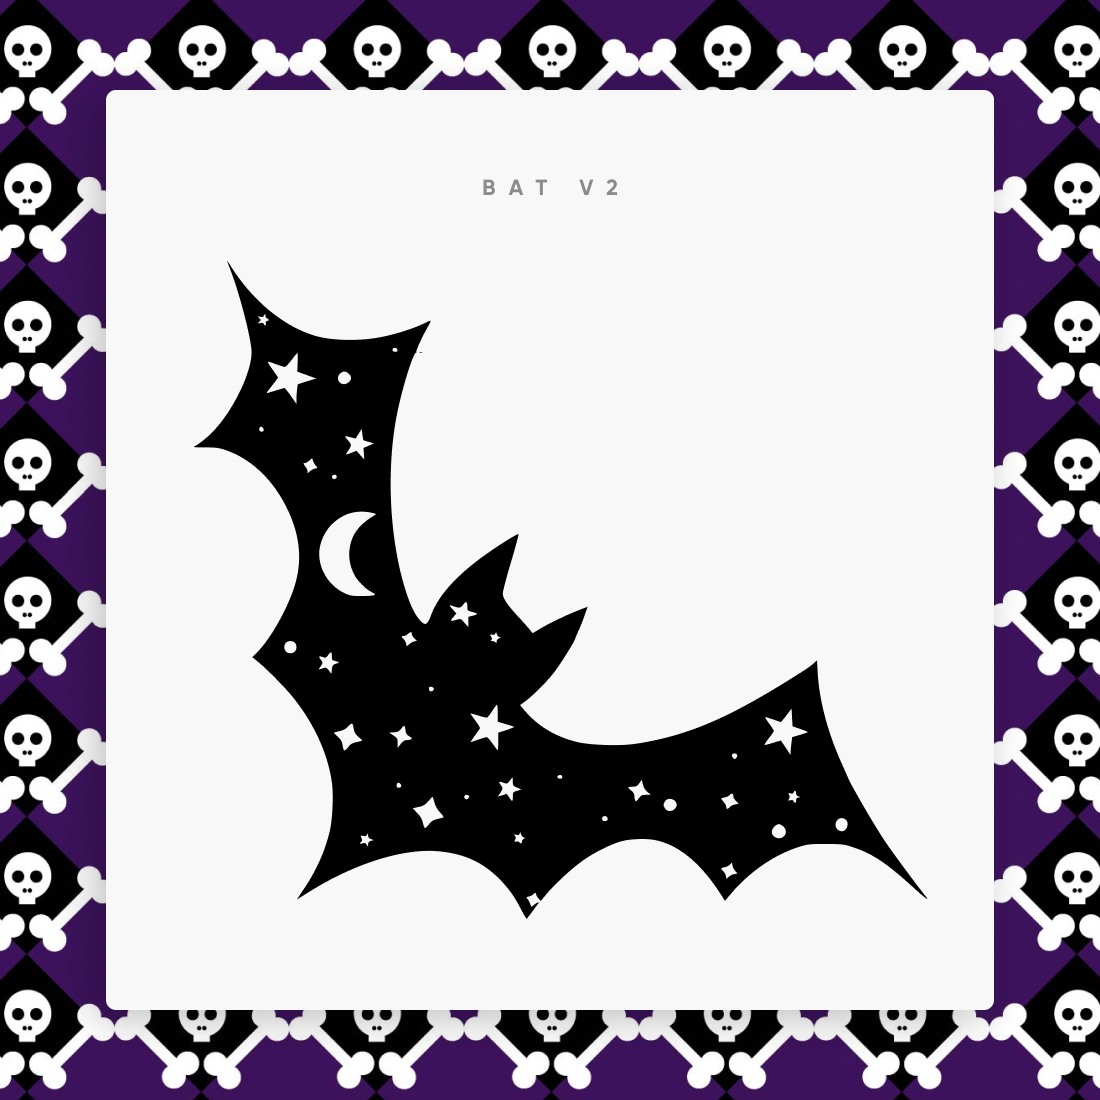 Bat with stars and skulls on a purple background.